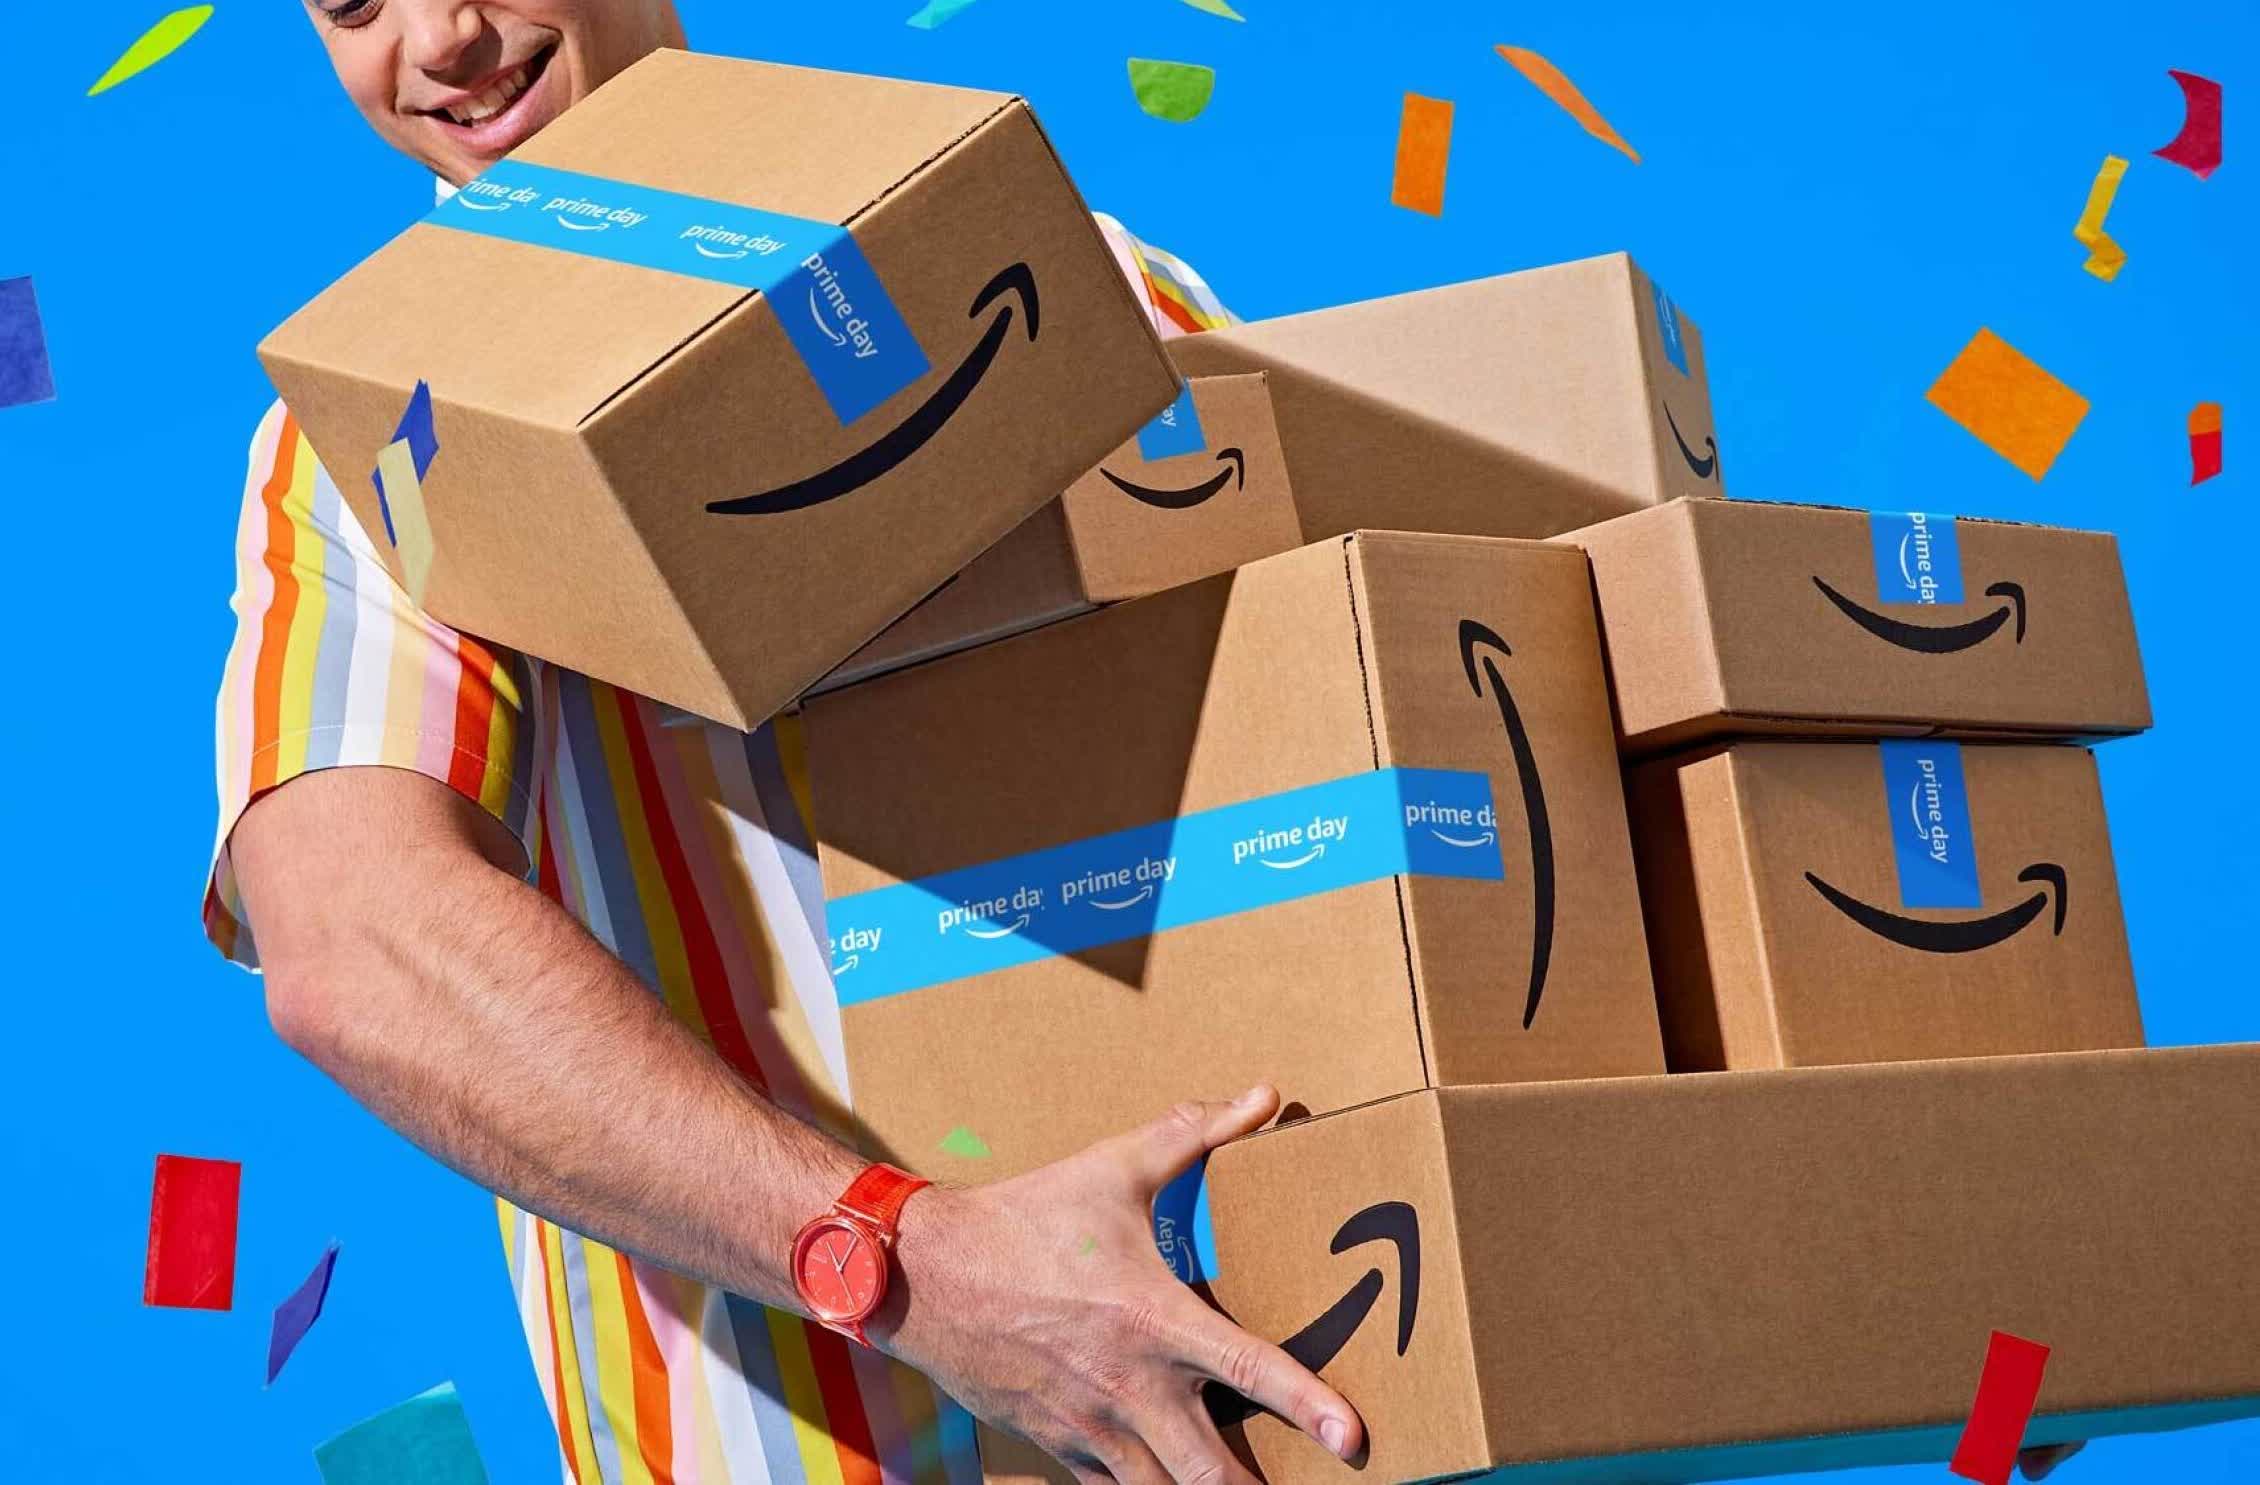 Amazon will host a second Prime Day-style shopping event this fall